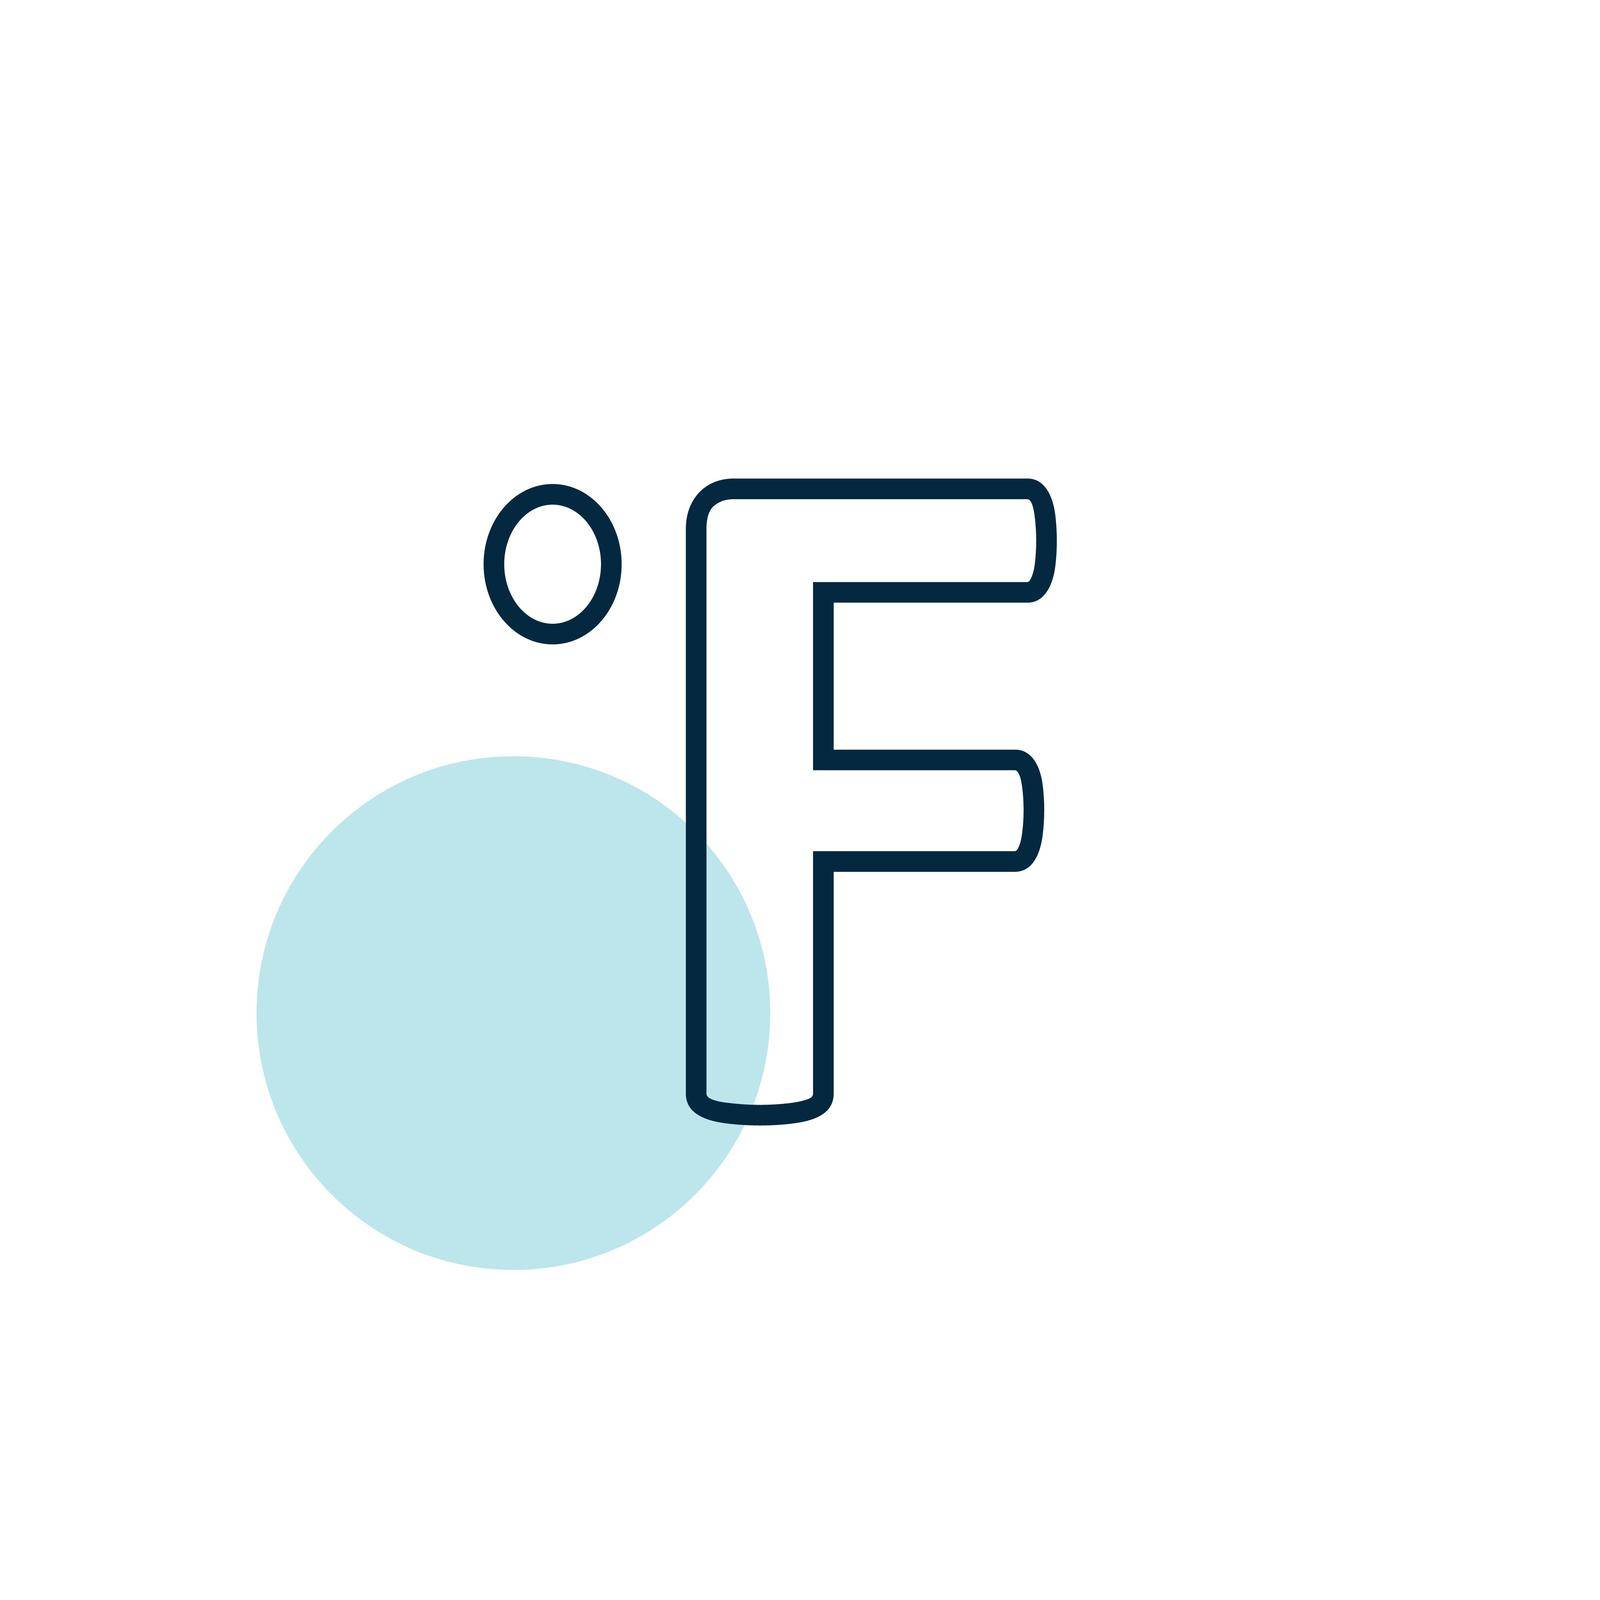 Fahrenheit degrees vector flat icon. Weather sign by nosik